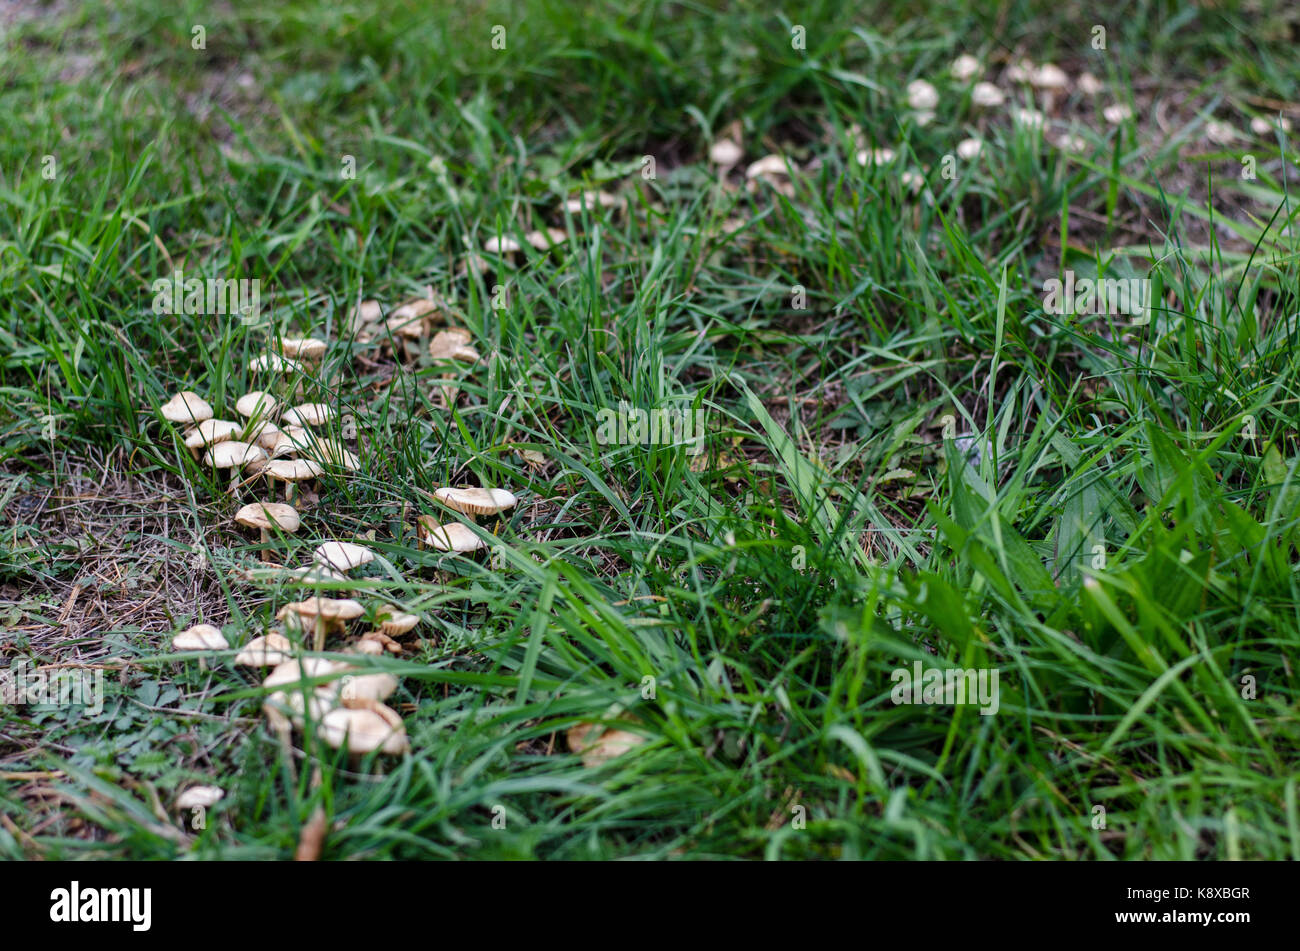 Marasmius oreades in a so called 'fairy ring' in a small hill during autumn. Stock Photo